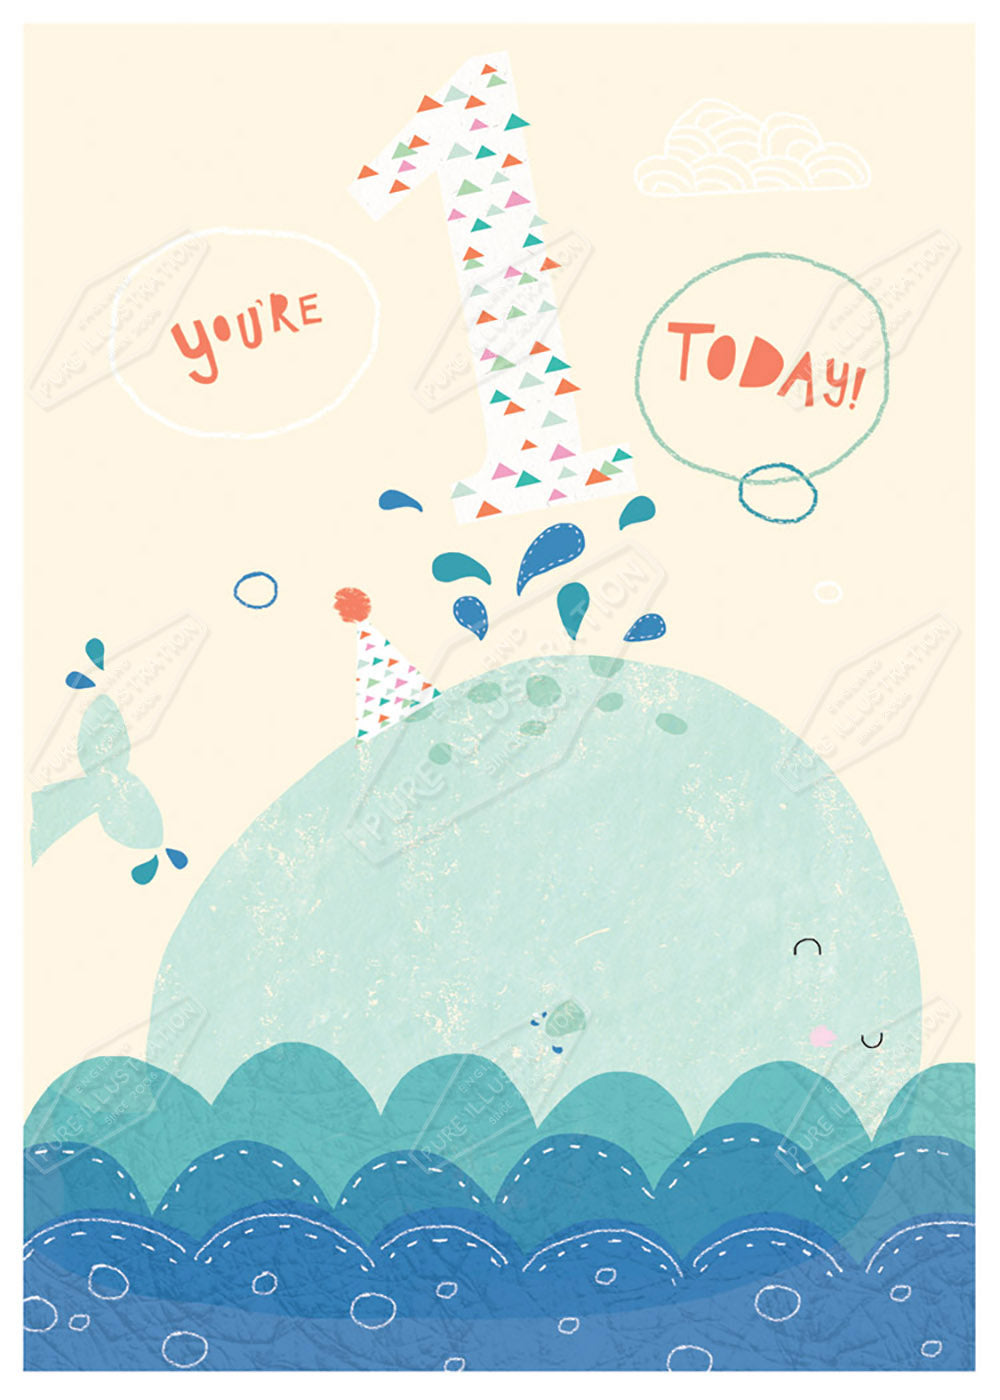 Whale Age Greeting Card by Cory Reid for Pure Art Licensing Agency & Surface Design Studio